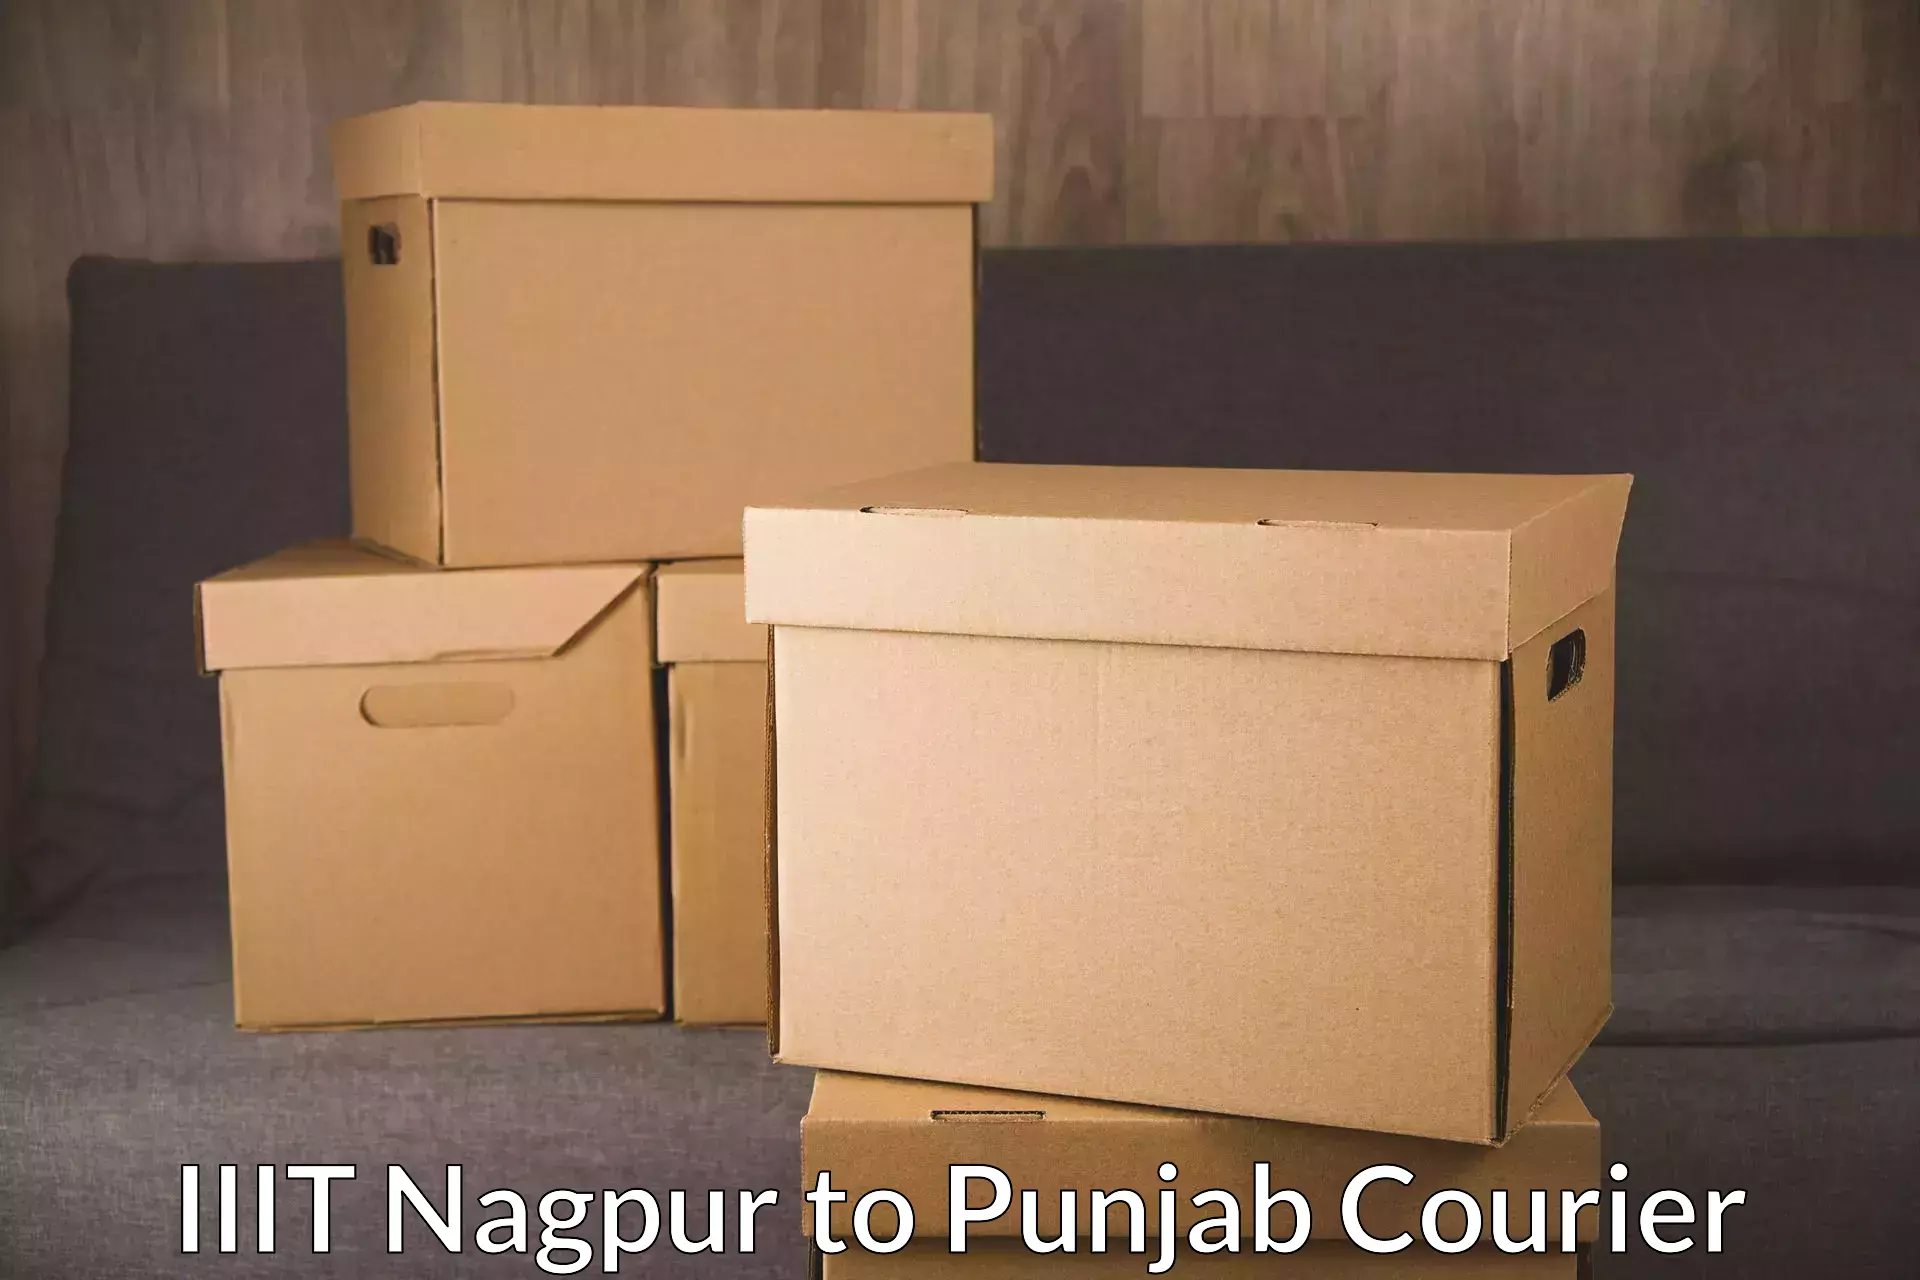 Small business couriers IIIT Nagpur to Punjab